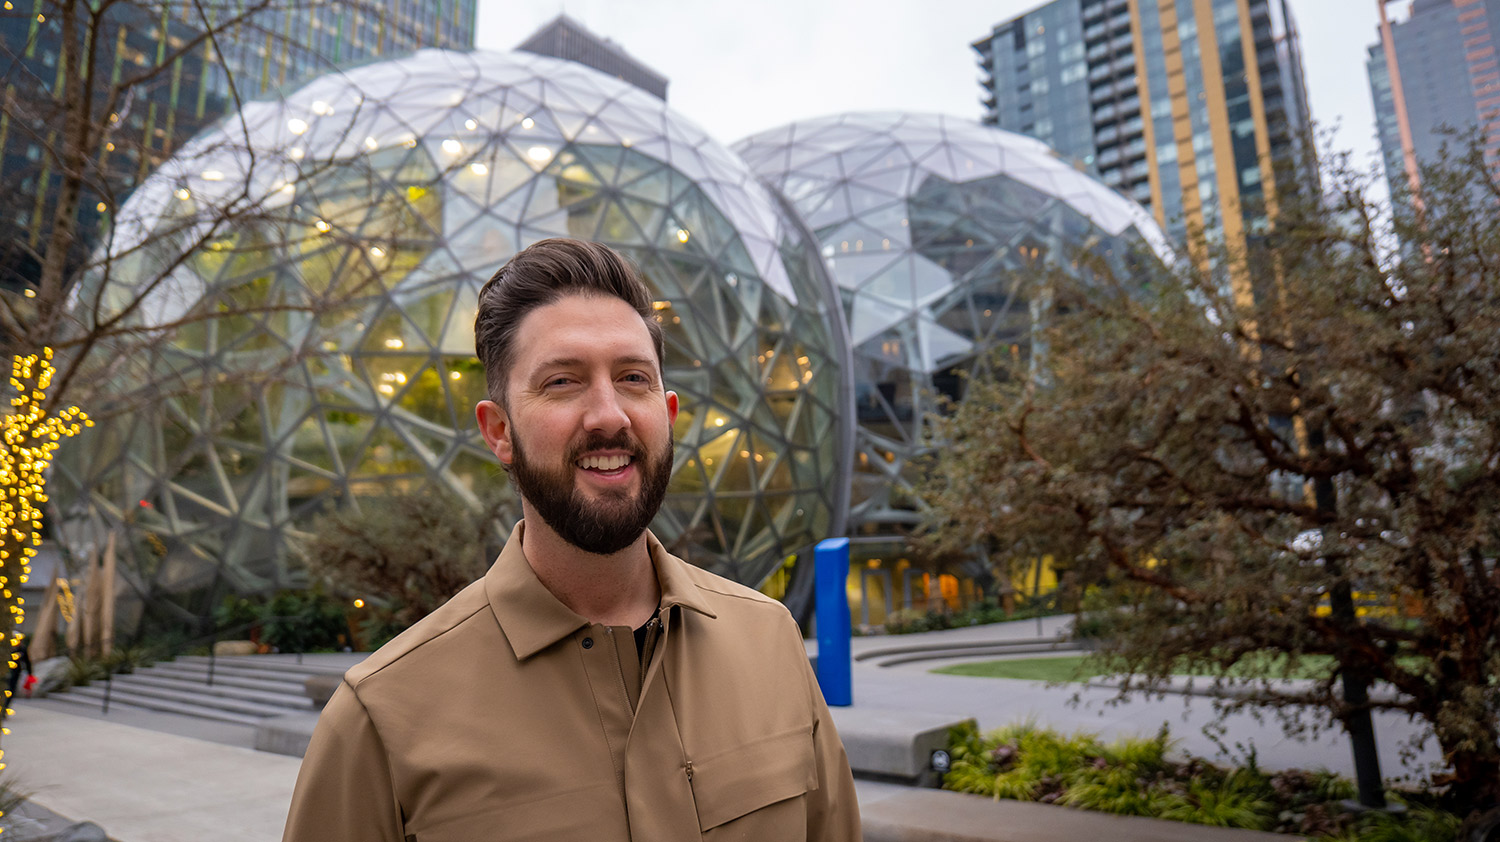 Regan Zeebuyth stands in front of the Amazon Spheres in downtown Seattle